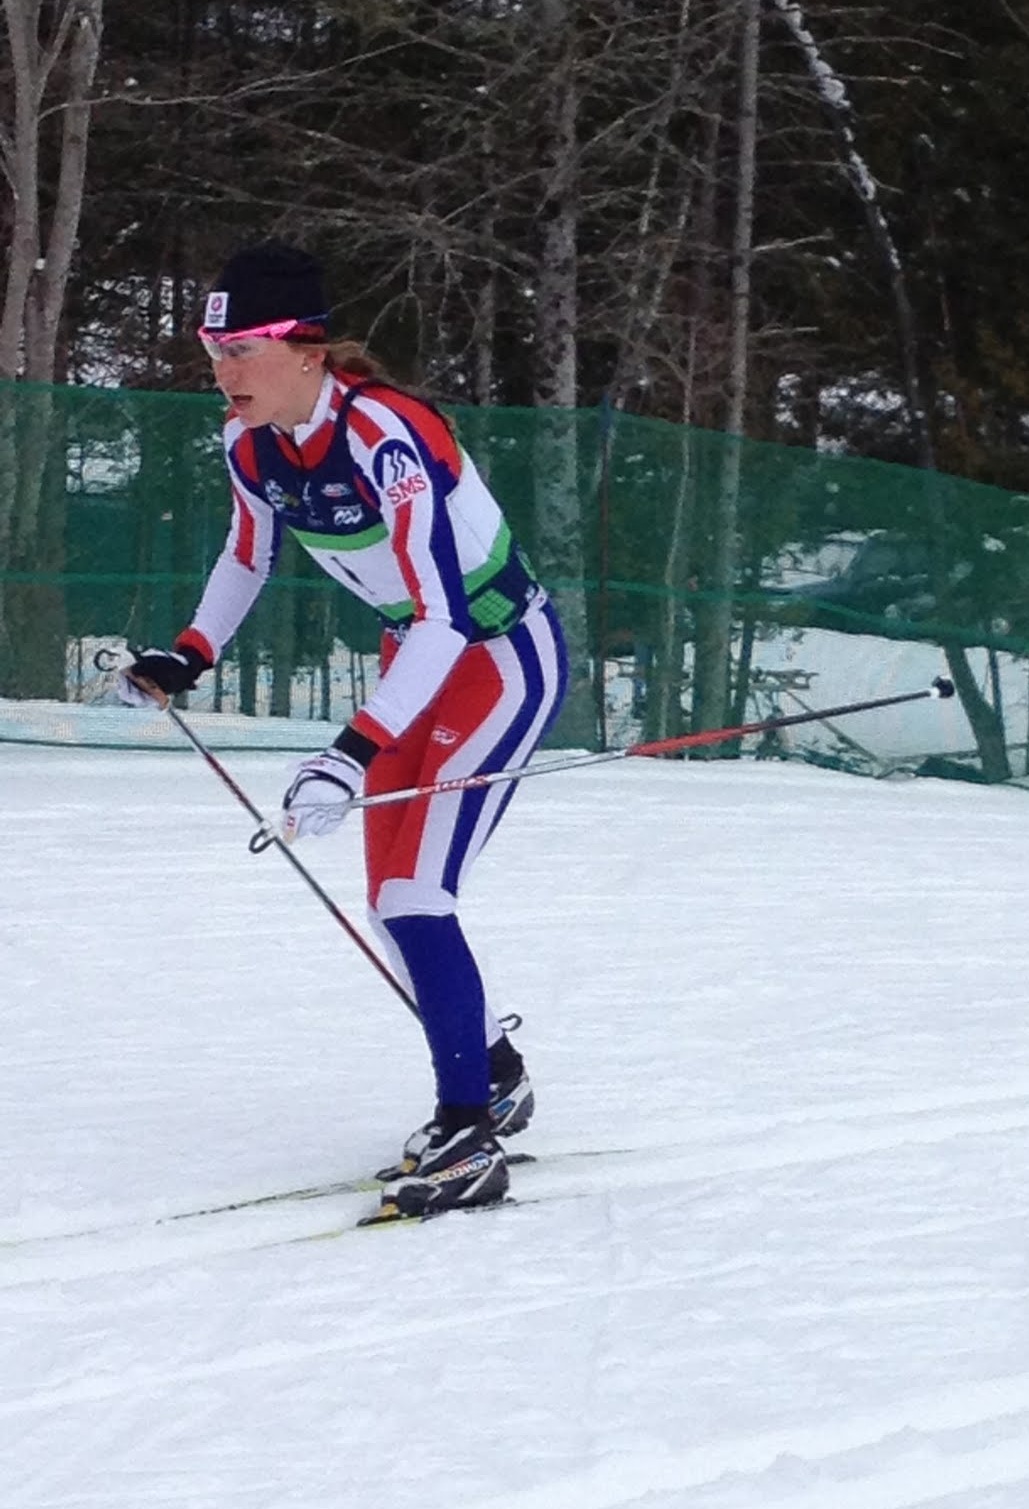 Local Teams Sweep Craftsbury Spring Tour as Eastern Skiers Prepare for California Finale